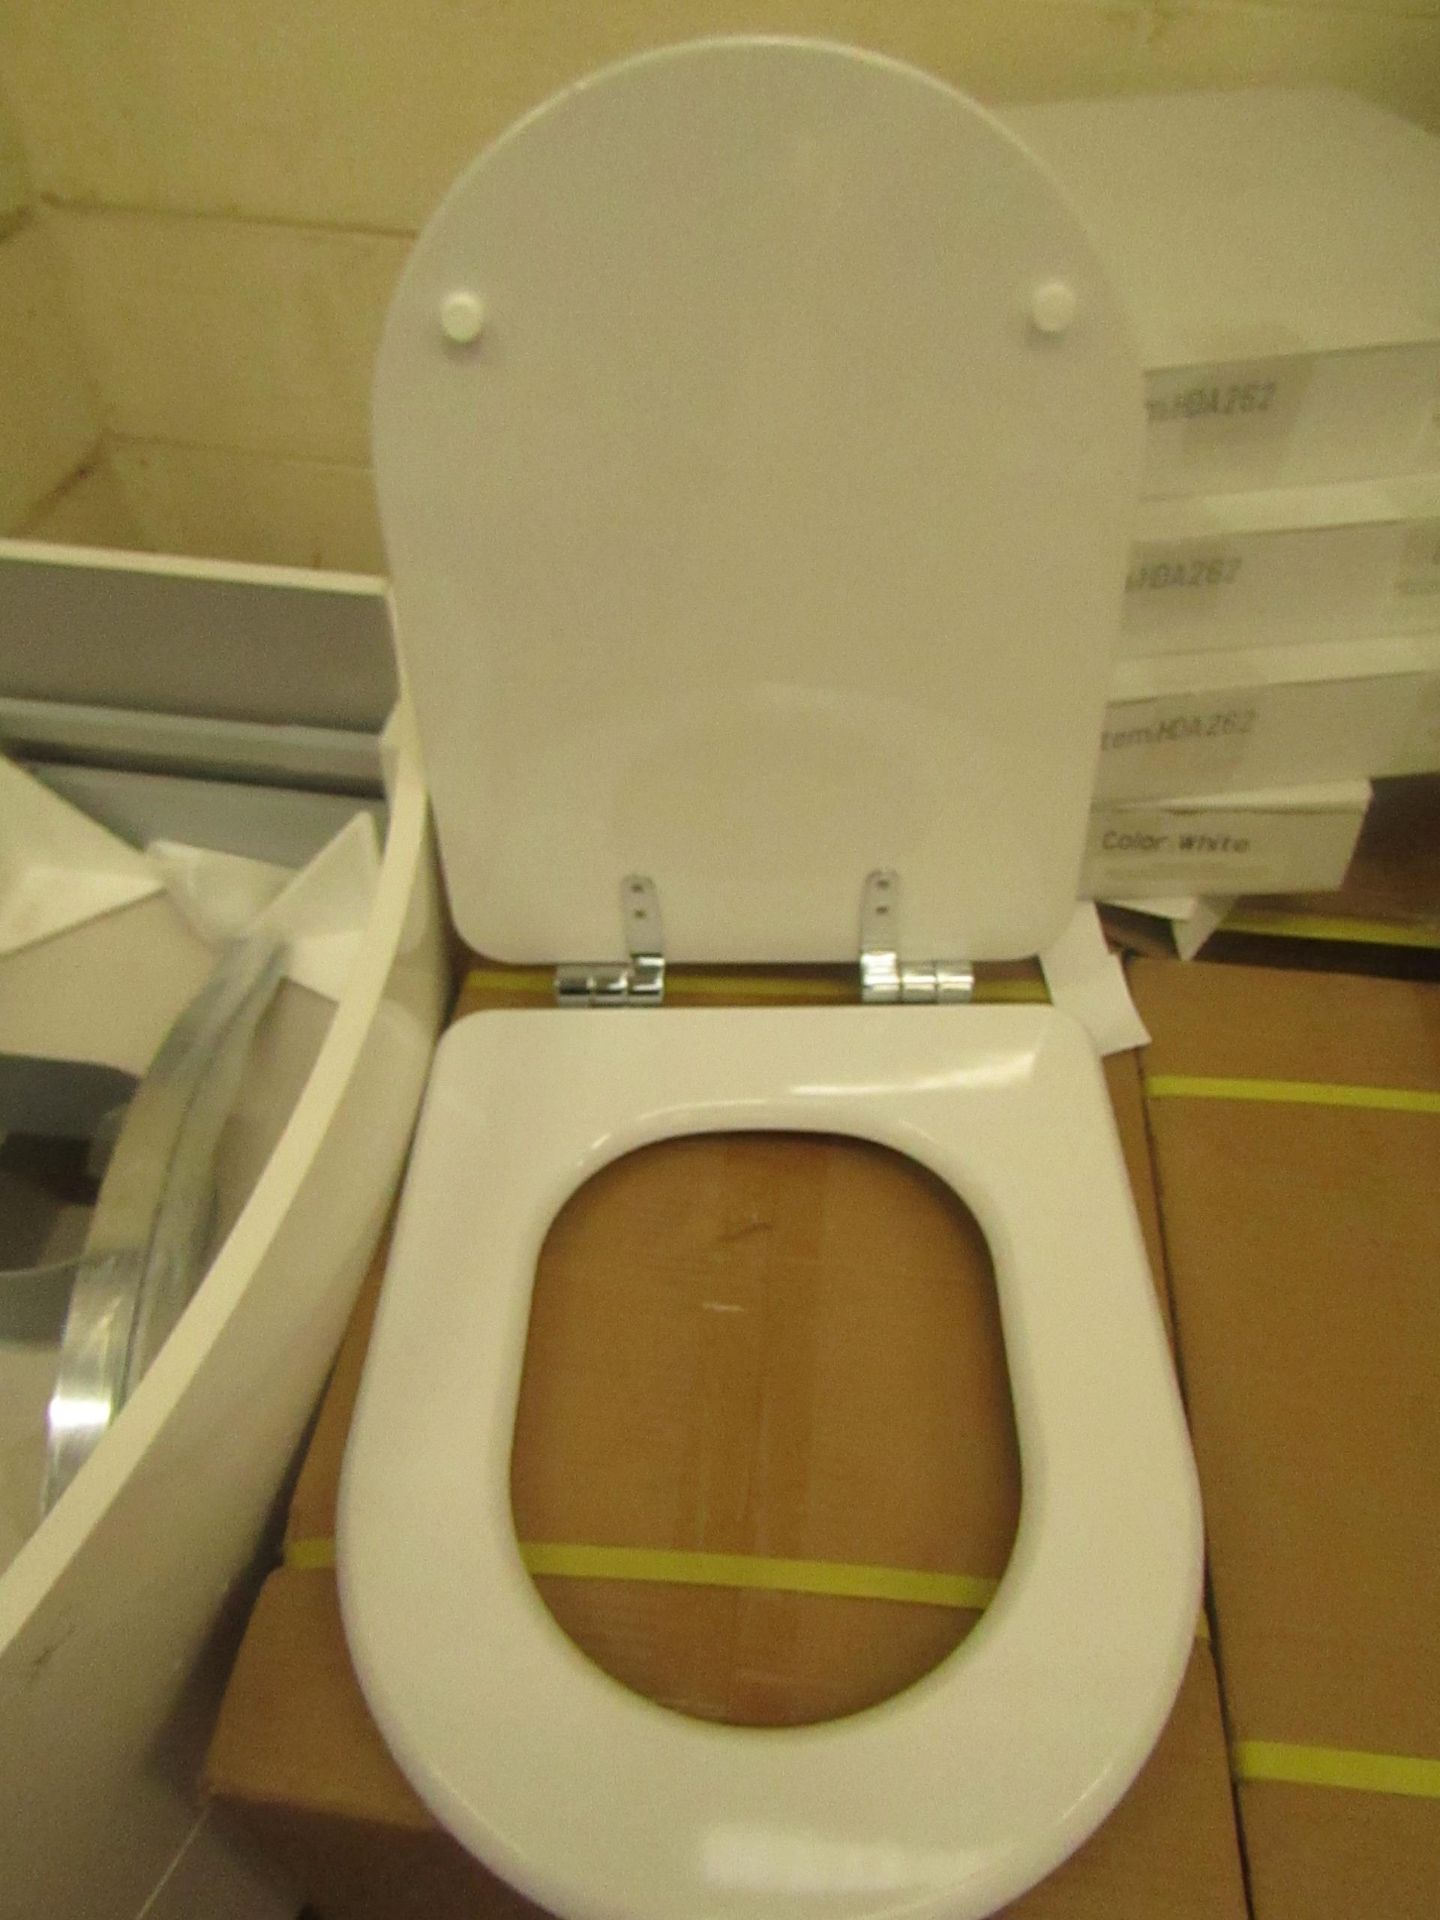 Unbranded Roca toilet seat, new and boxed.